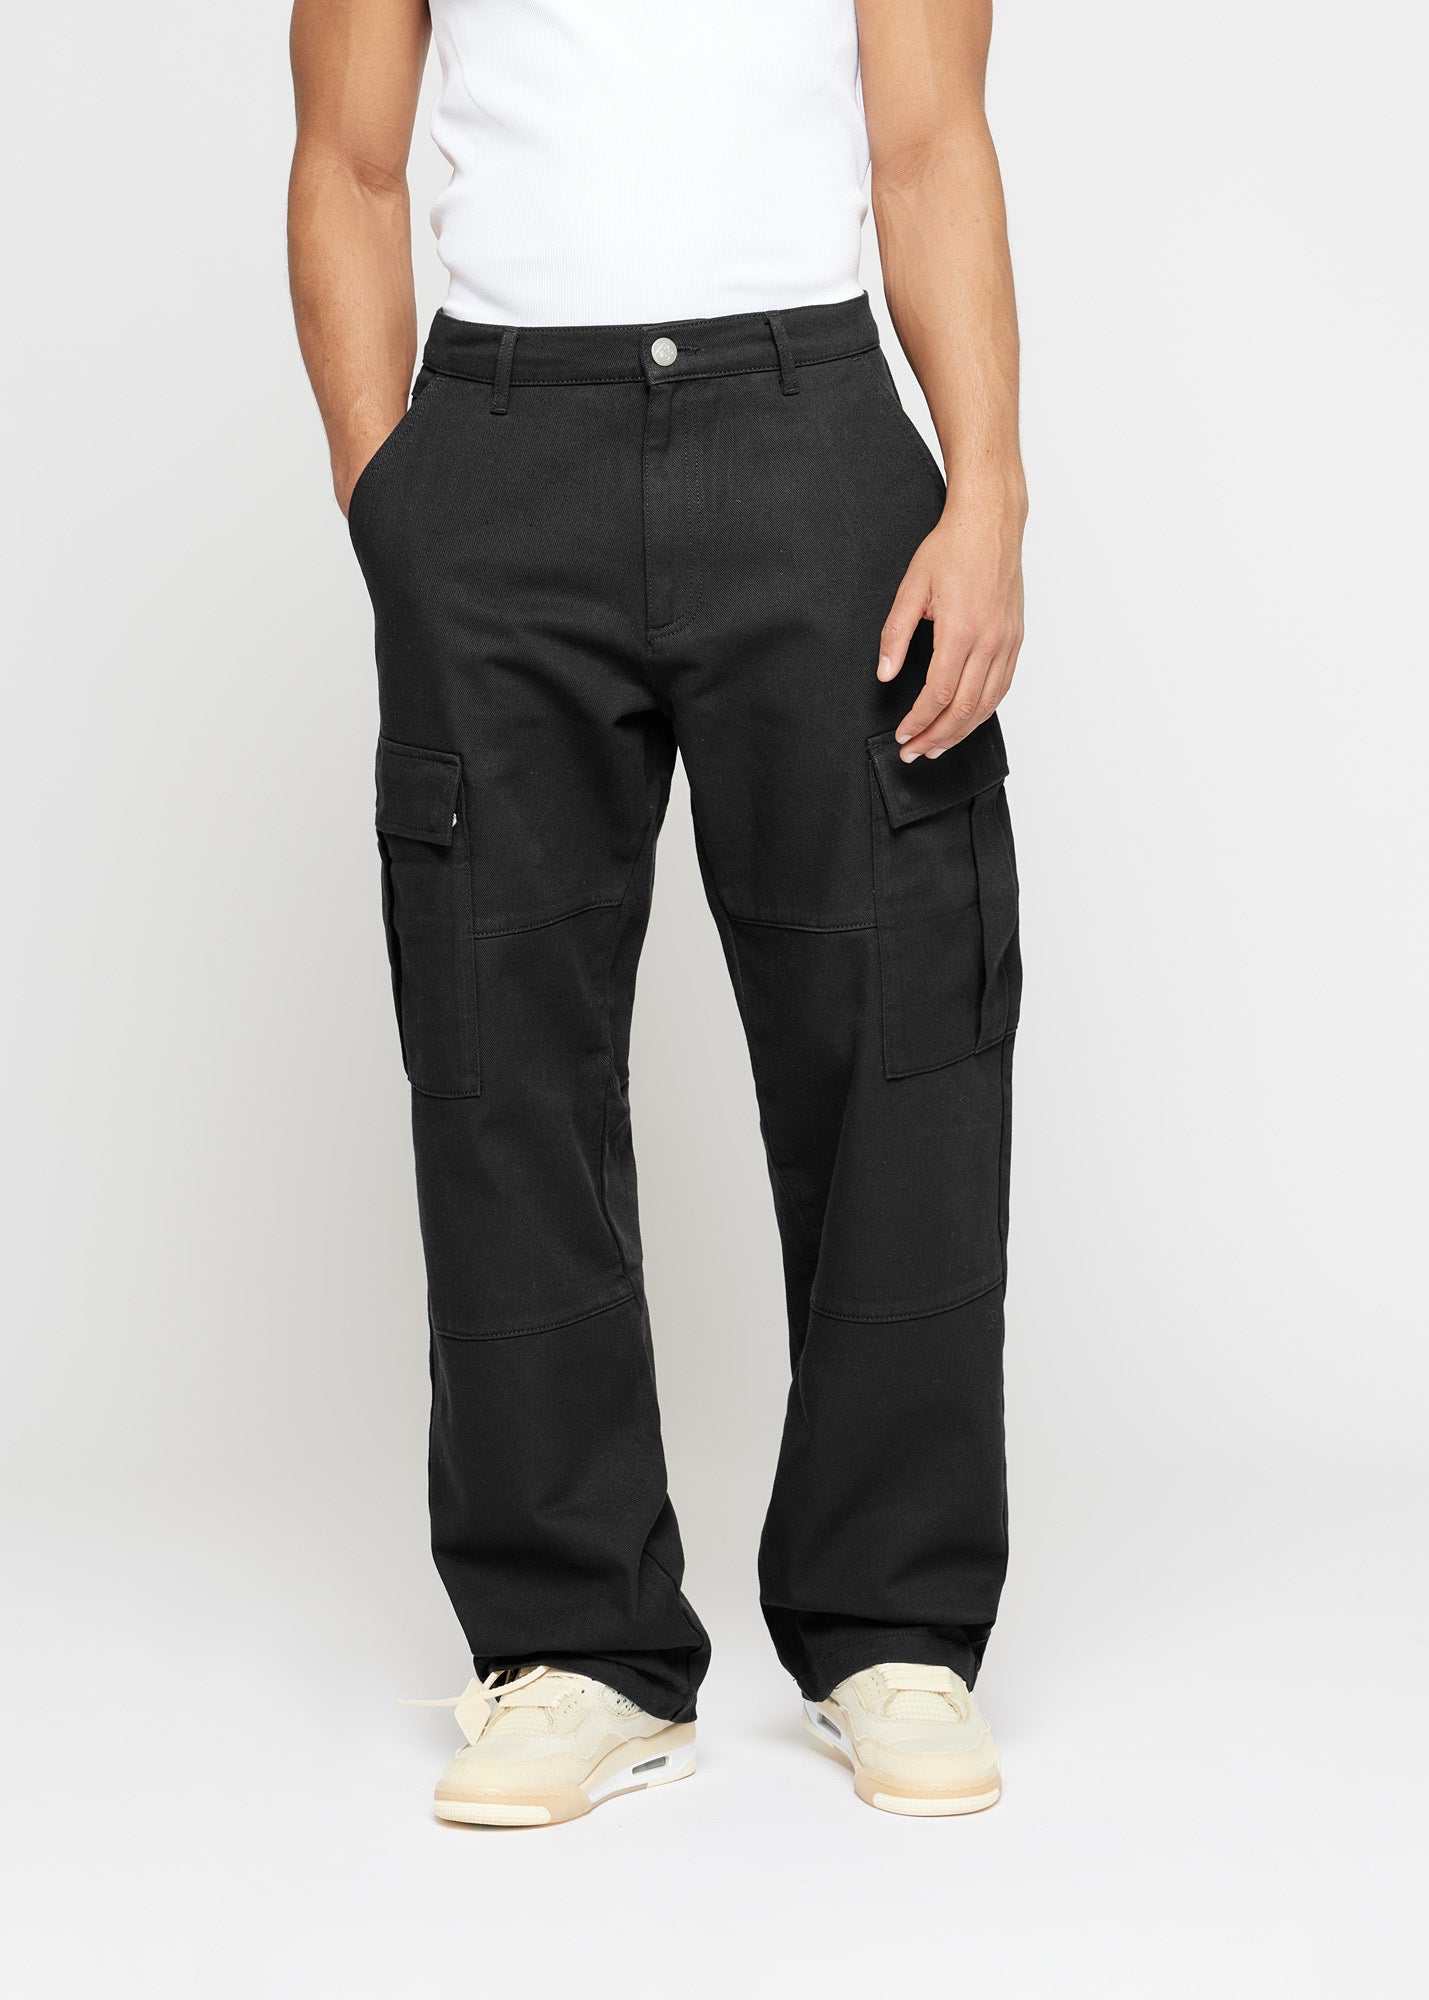 JOBMAN Ultimate Heavy Duty Workpants - 2180 with ultimate comfort,  durability, function and quality.